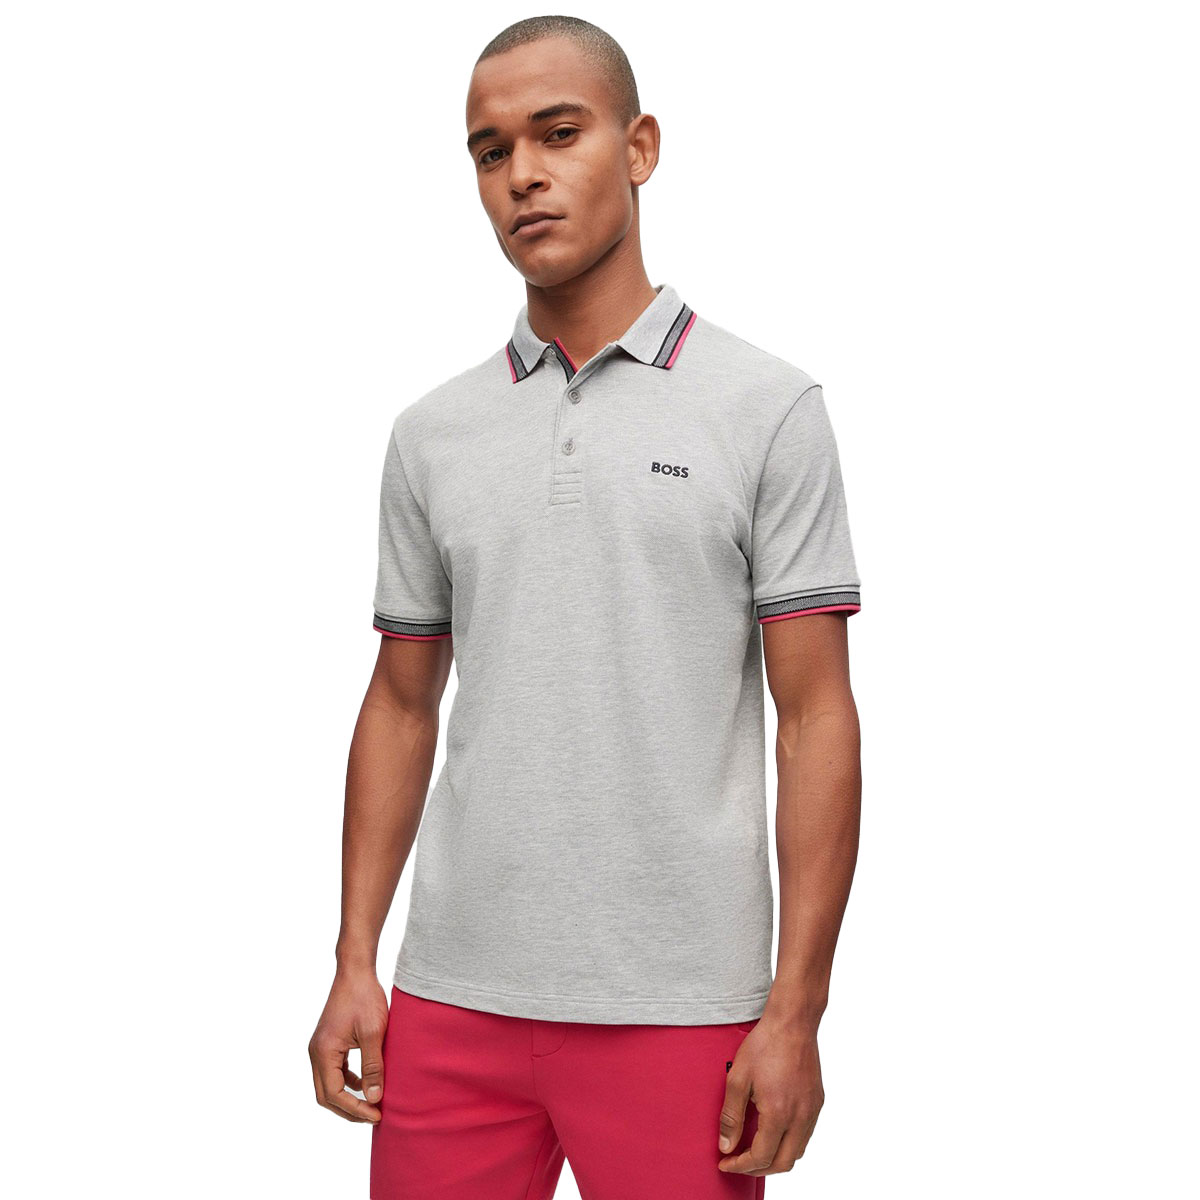 Boss Paddy Golf Polo from american golf